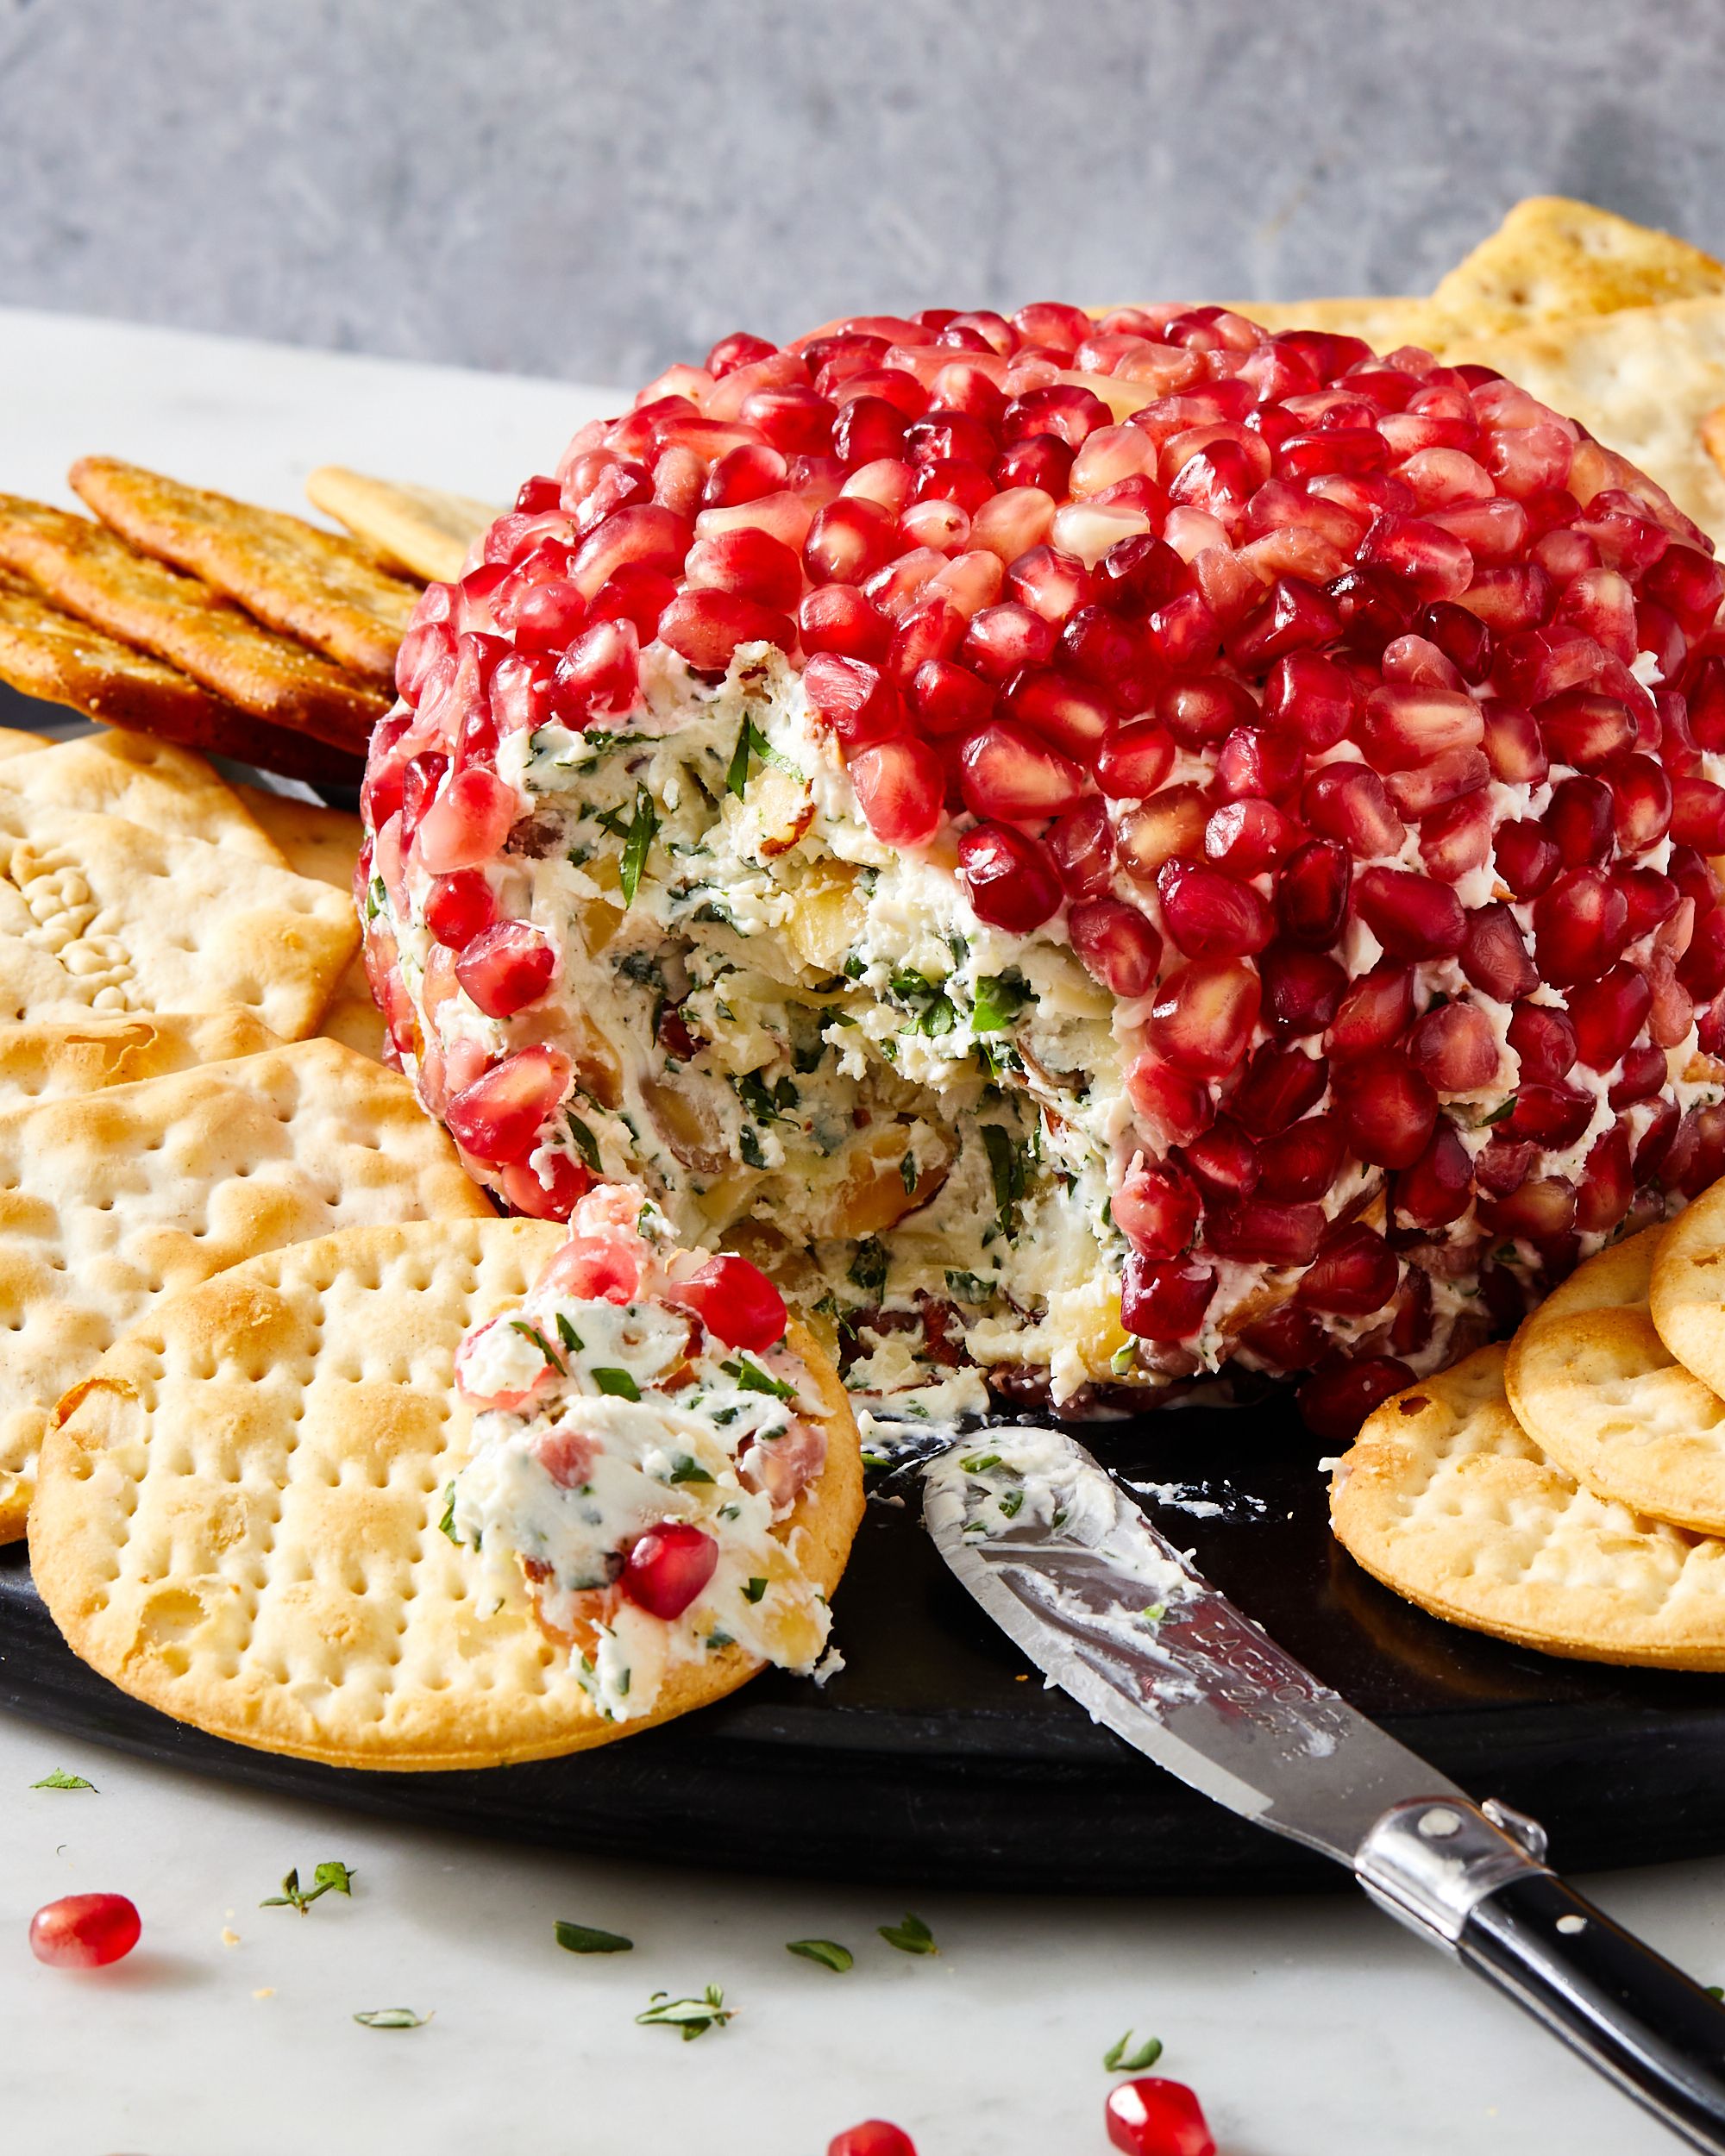 20 Best Christmas Appetizers